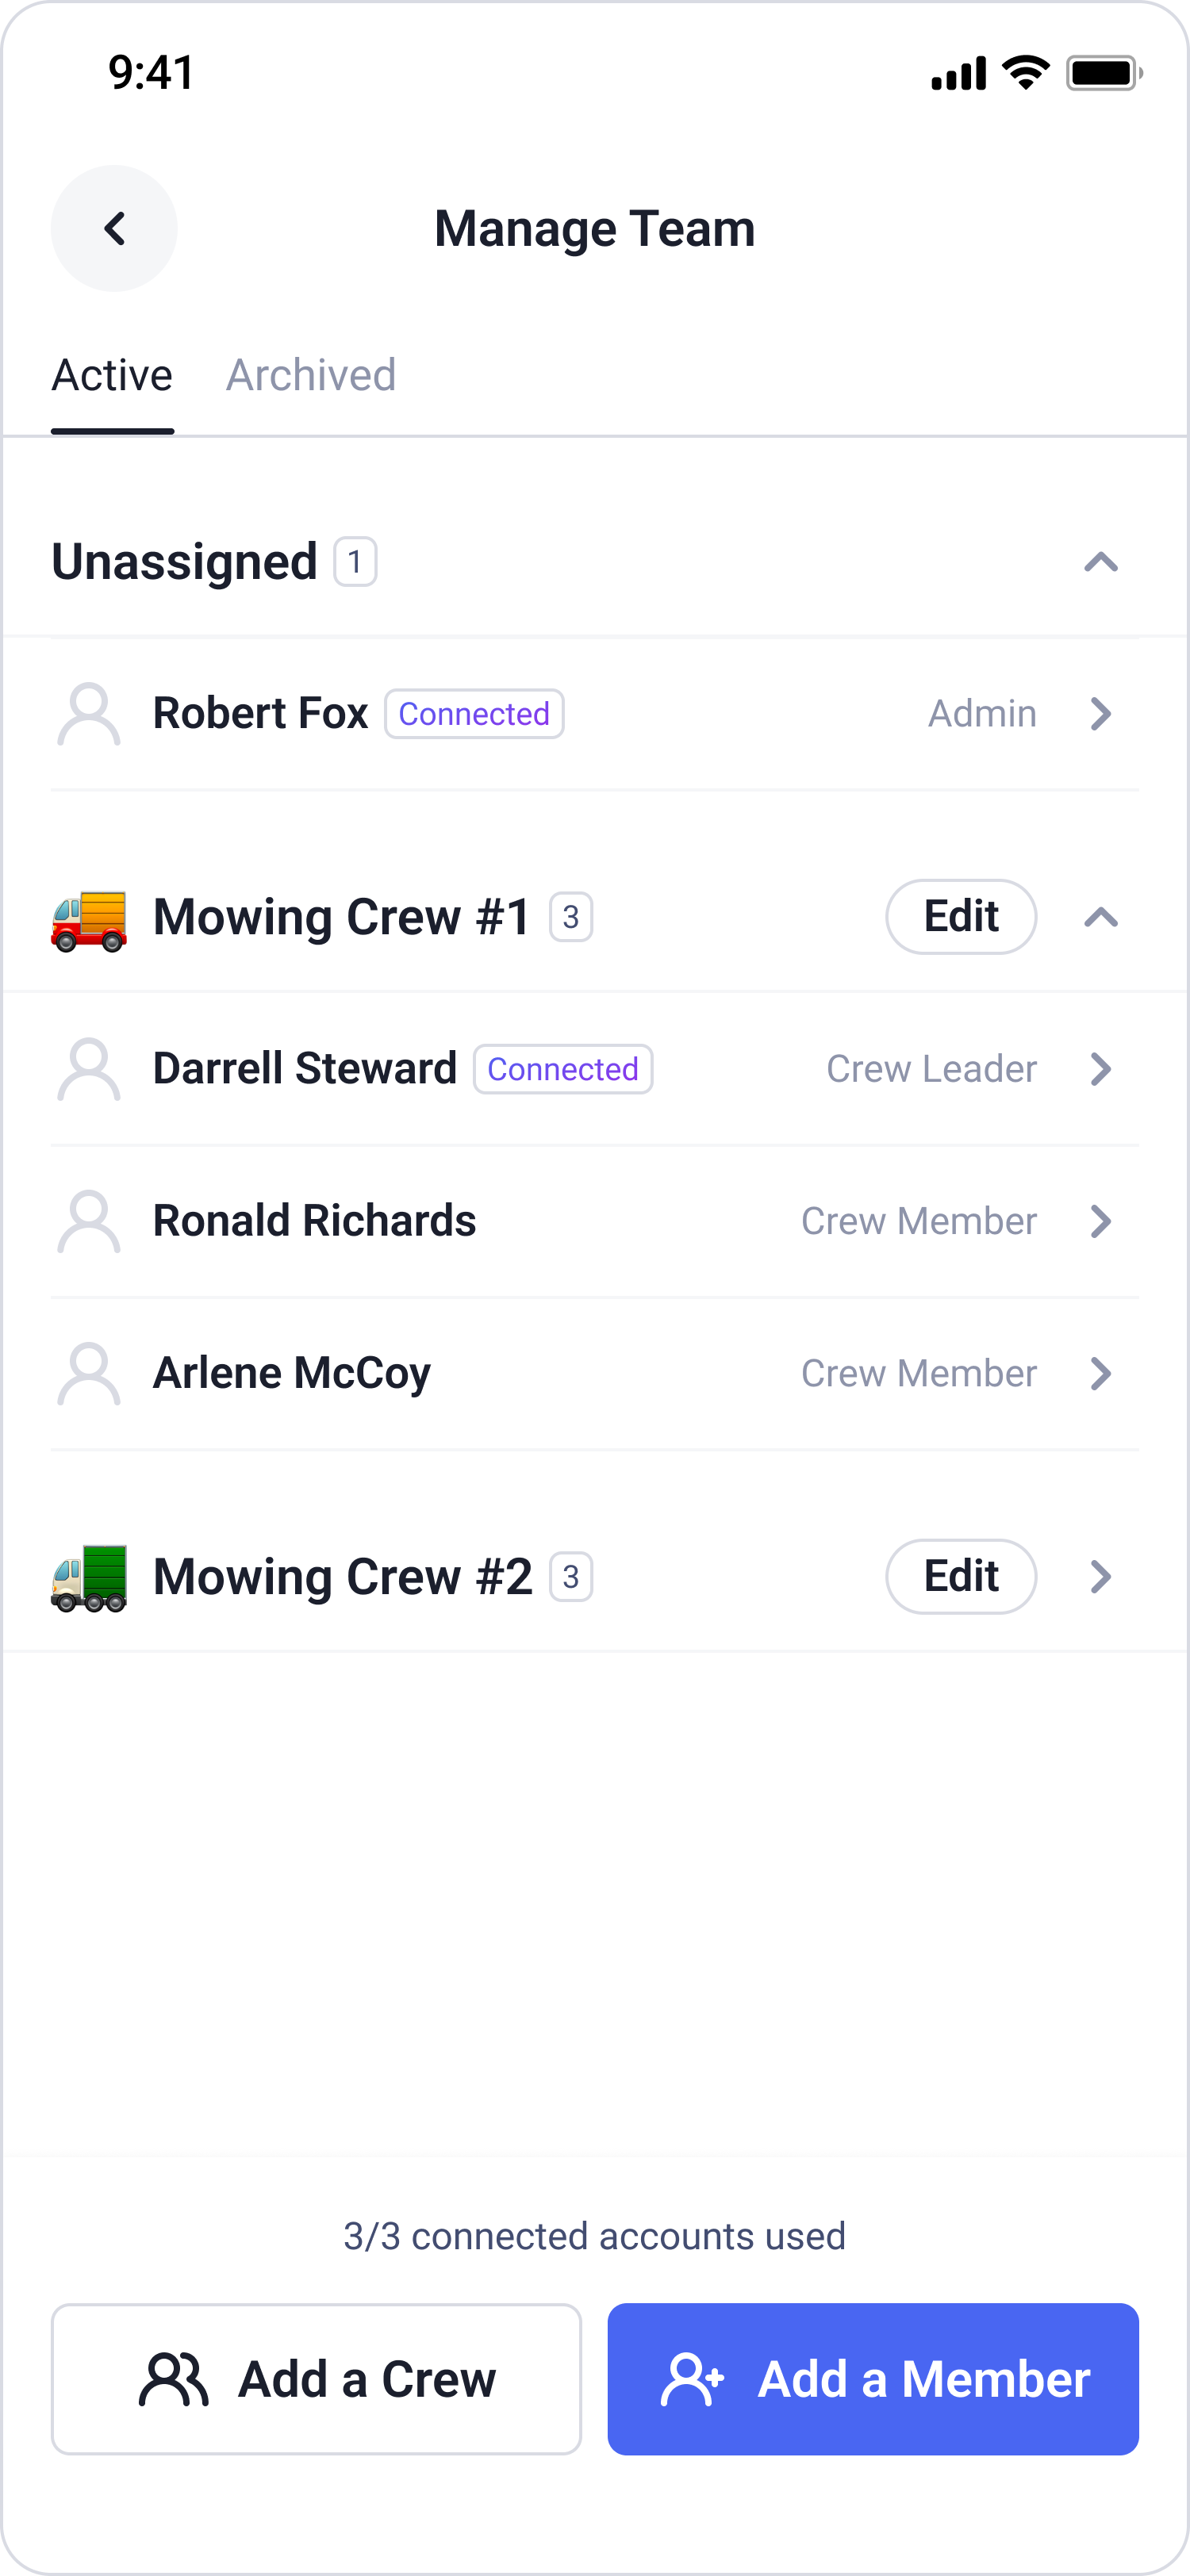 Assign crew members to crews, set permissions, add users and keep track of important employee information.